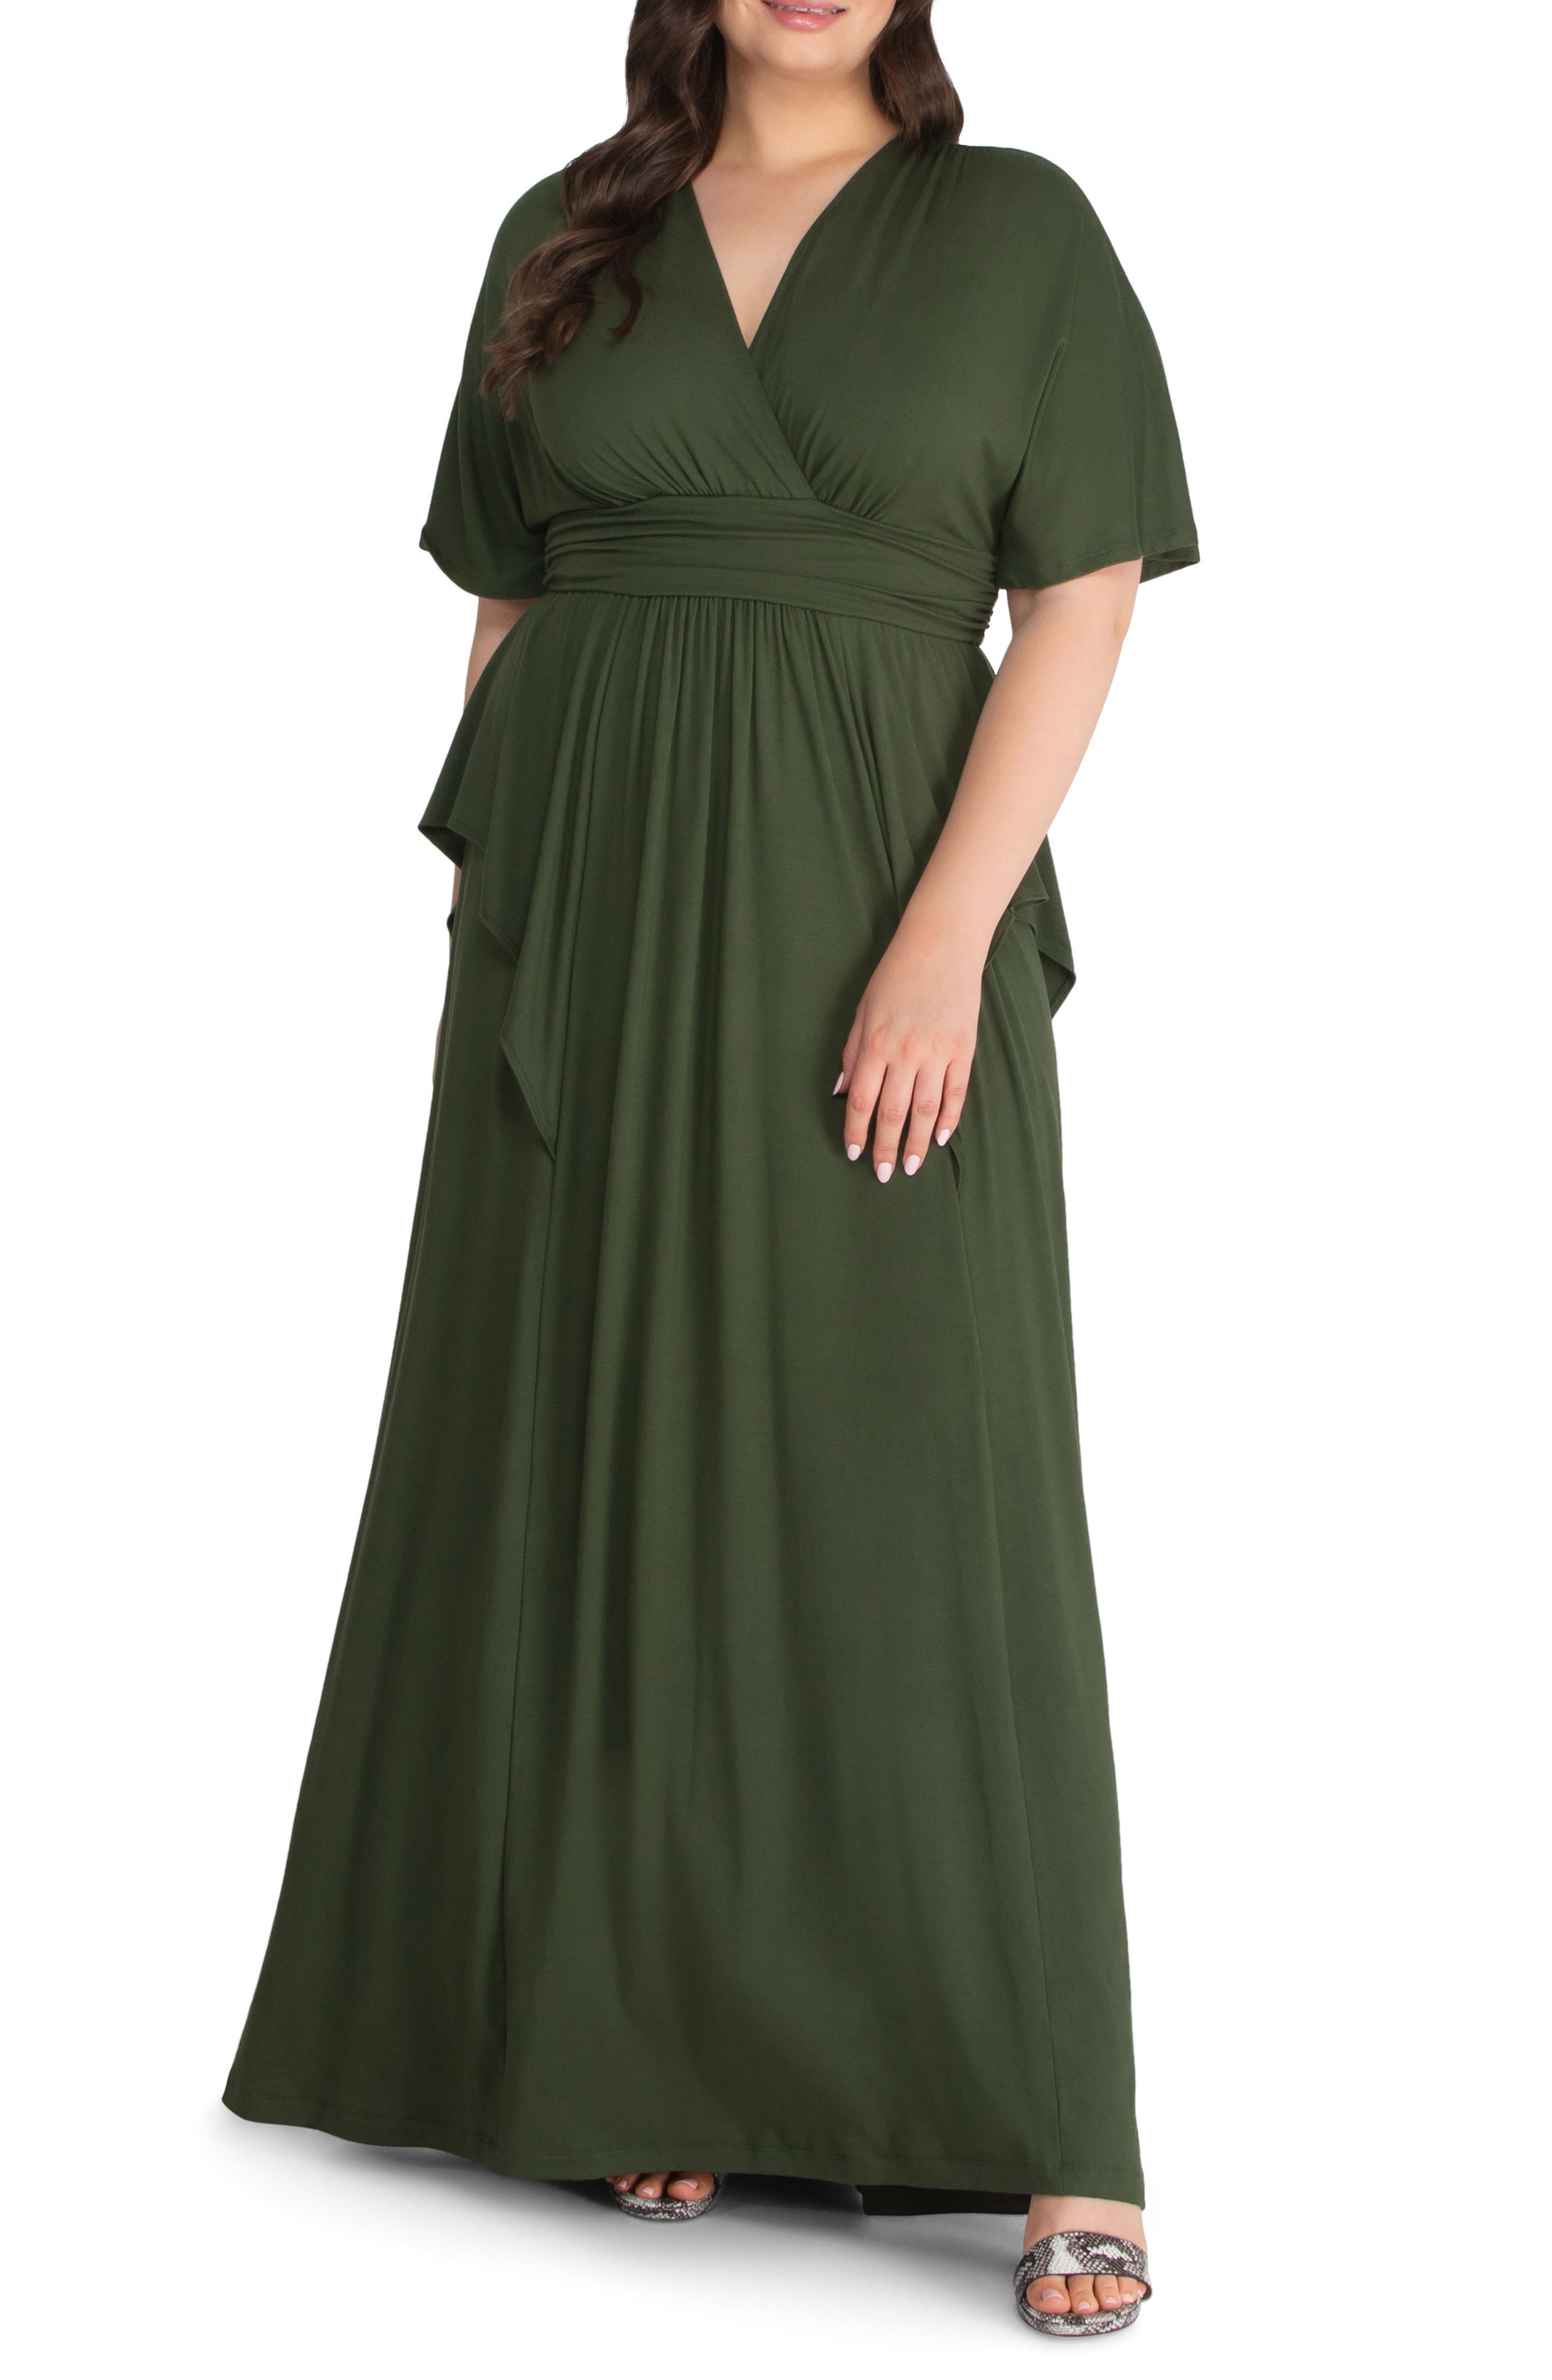 Green Plus Size Dresses for Women ...